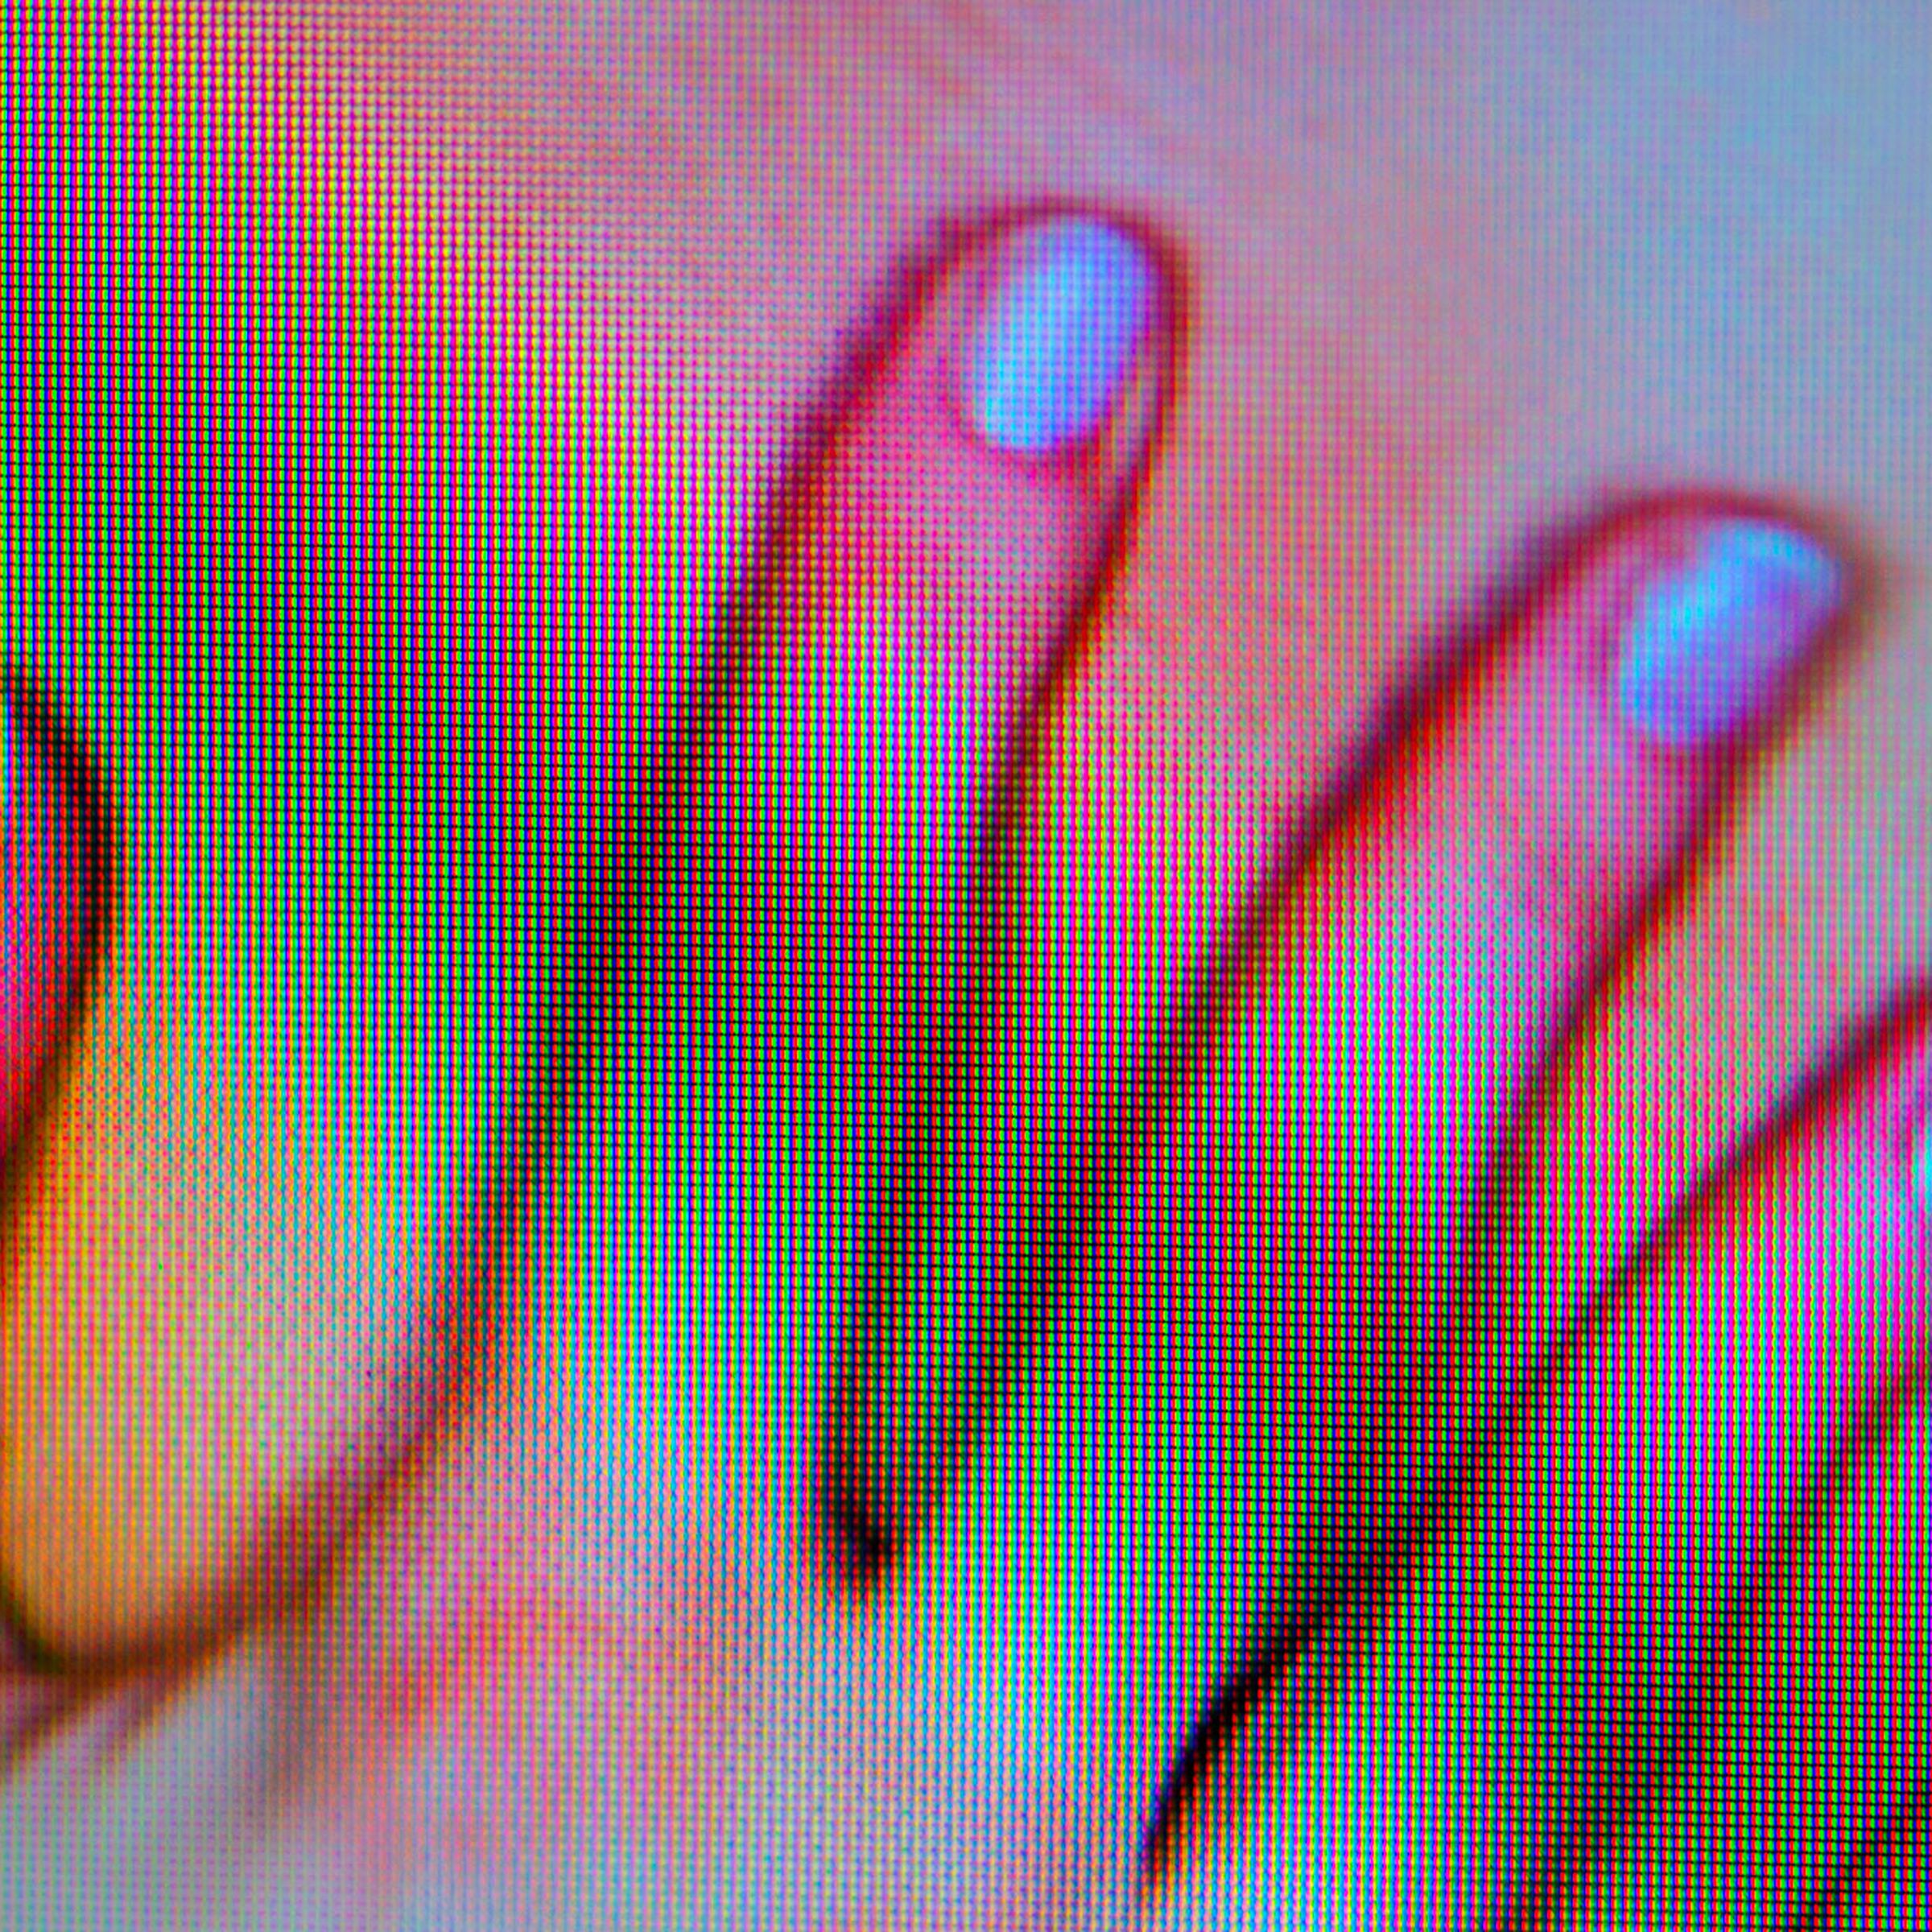 Blurry screenshot of a female hand touching her skin on a device.